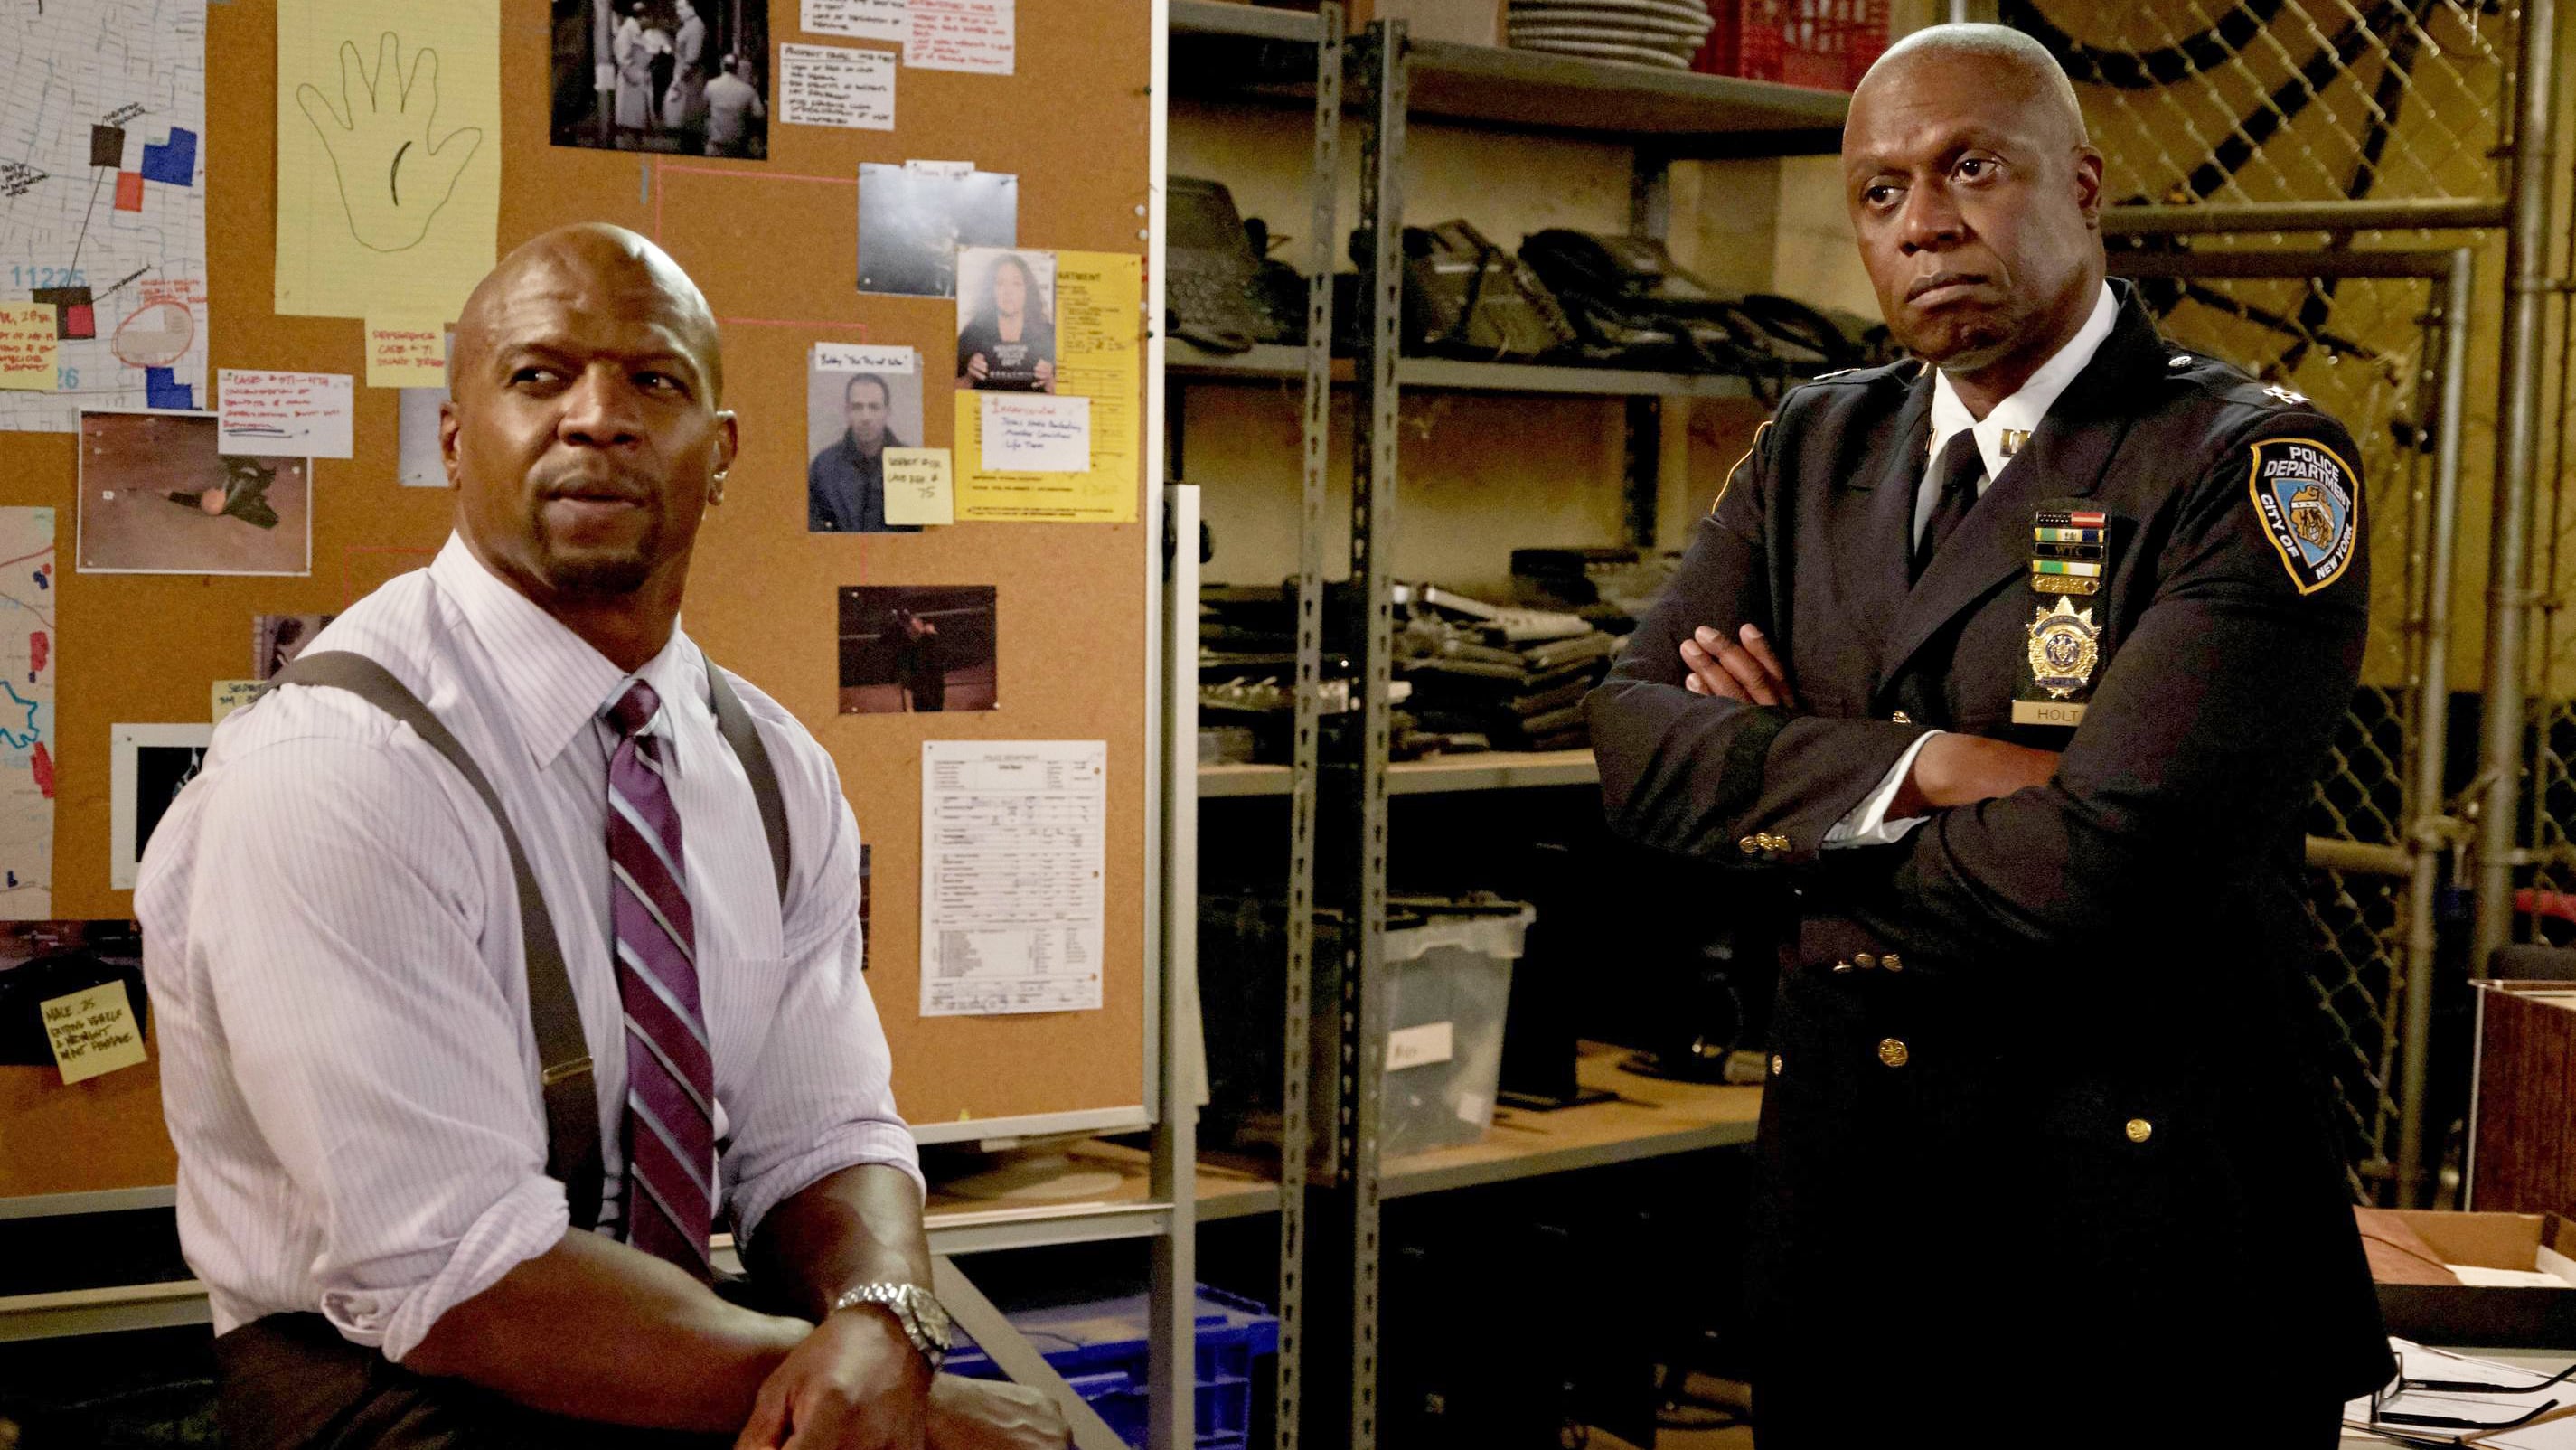 Terry and Captain Holt